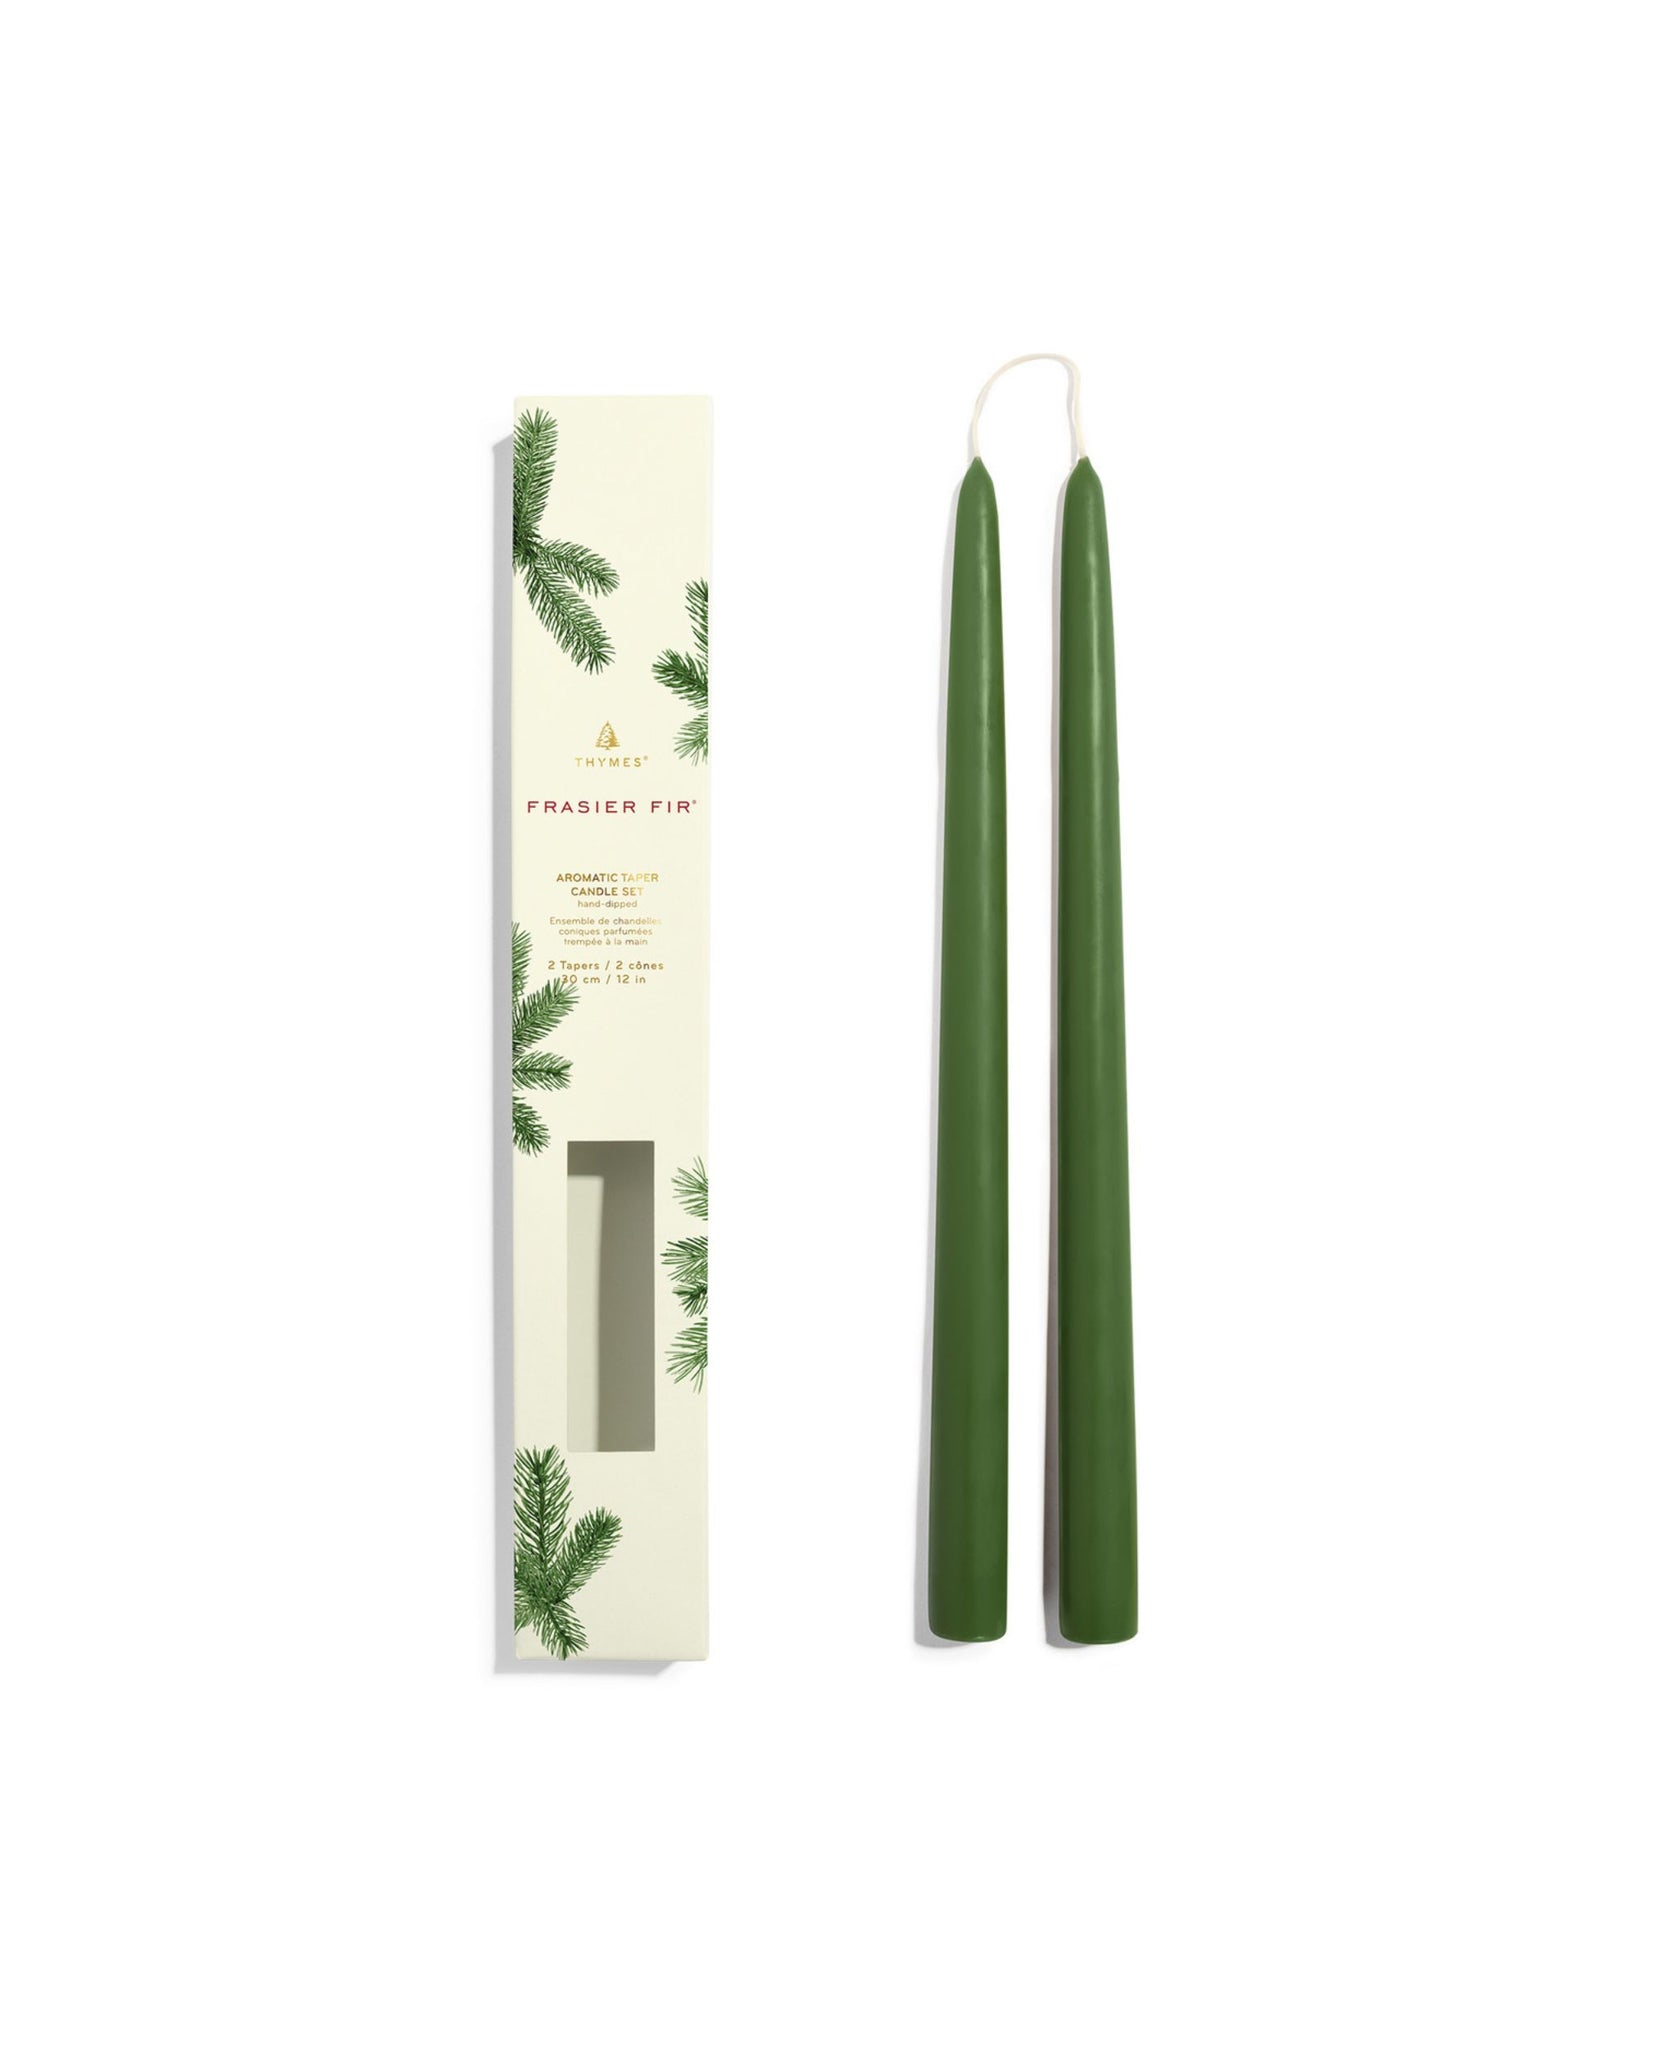 Thymes - Frasier Fir Frosted Plaid Candle Set